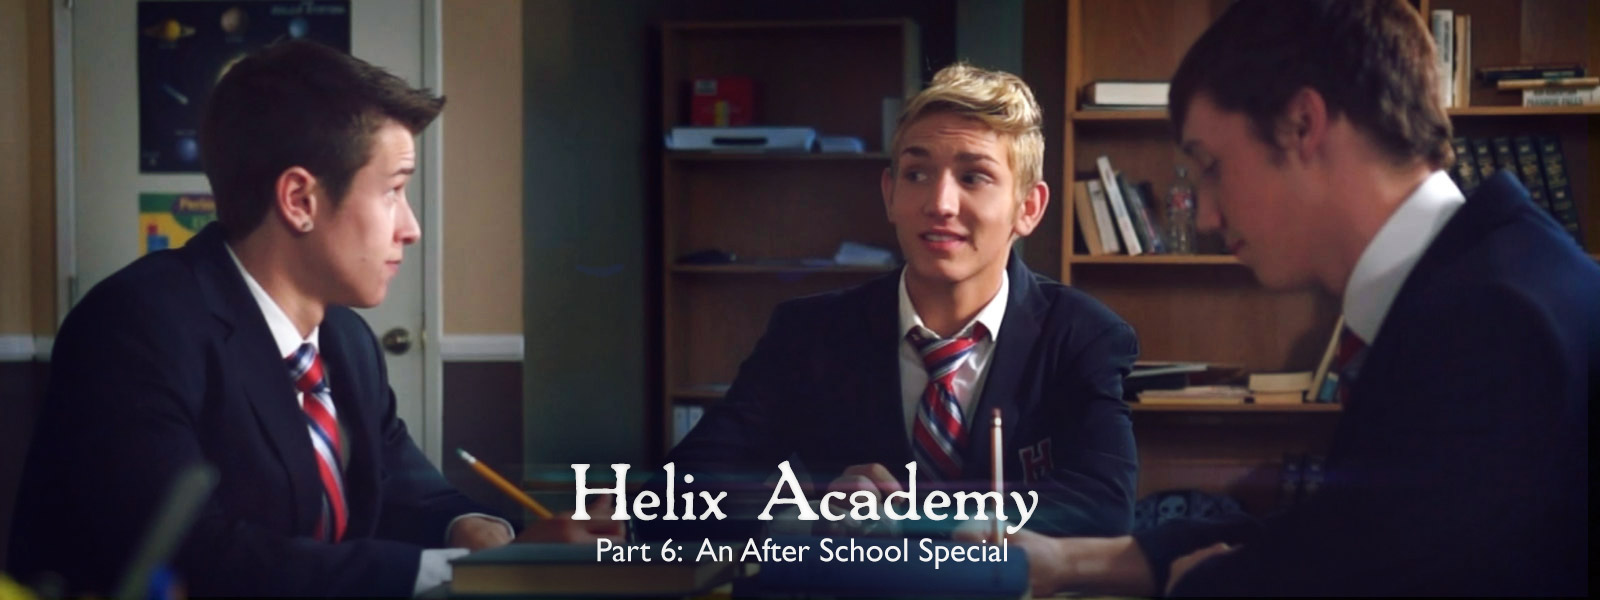 Helix Academy 2 Episode 6: An After School Special. 